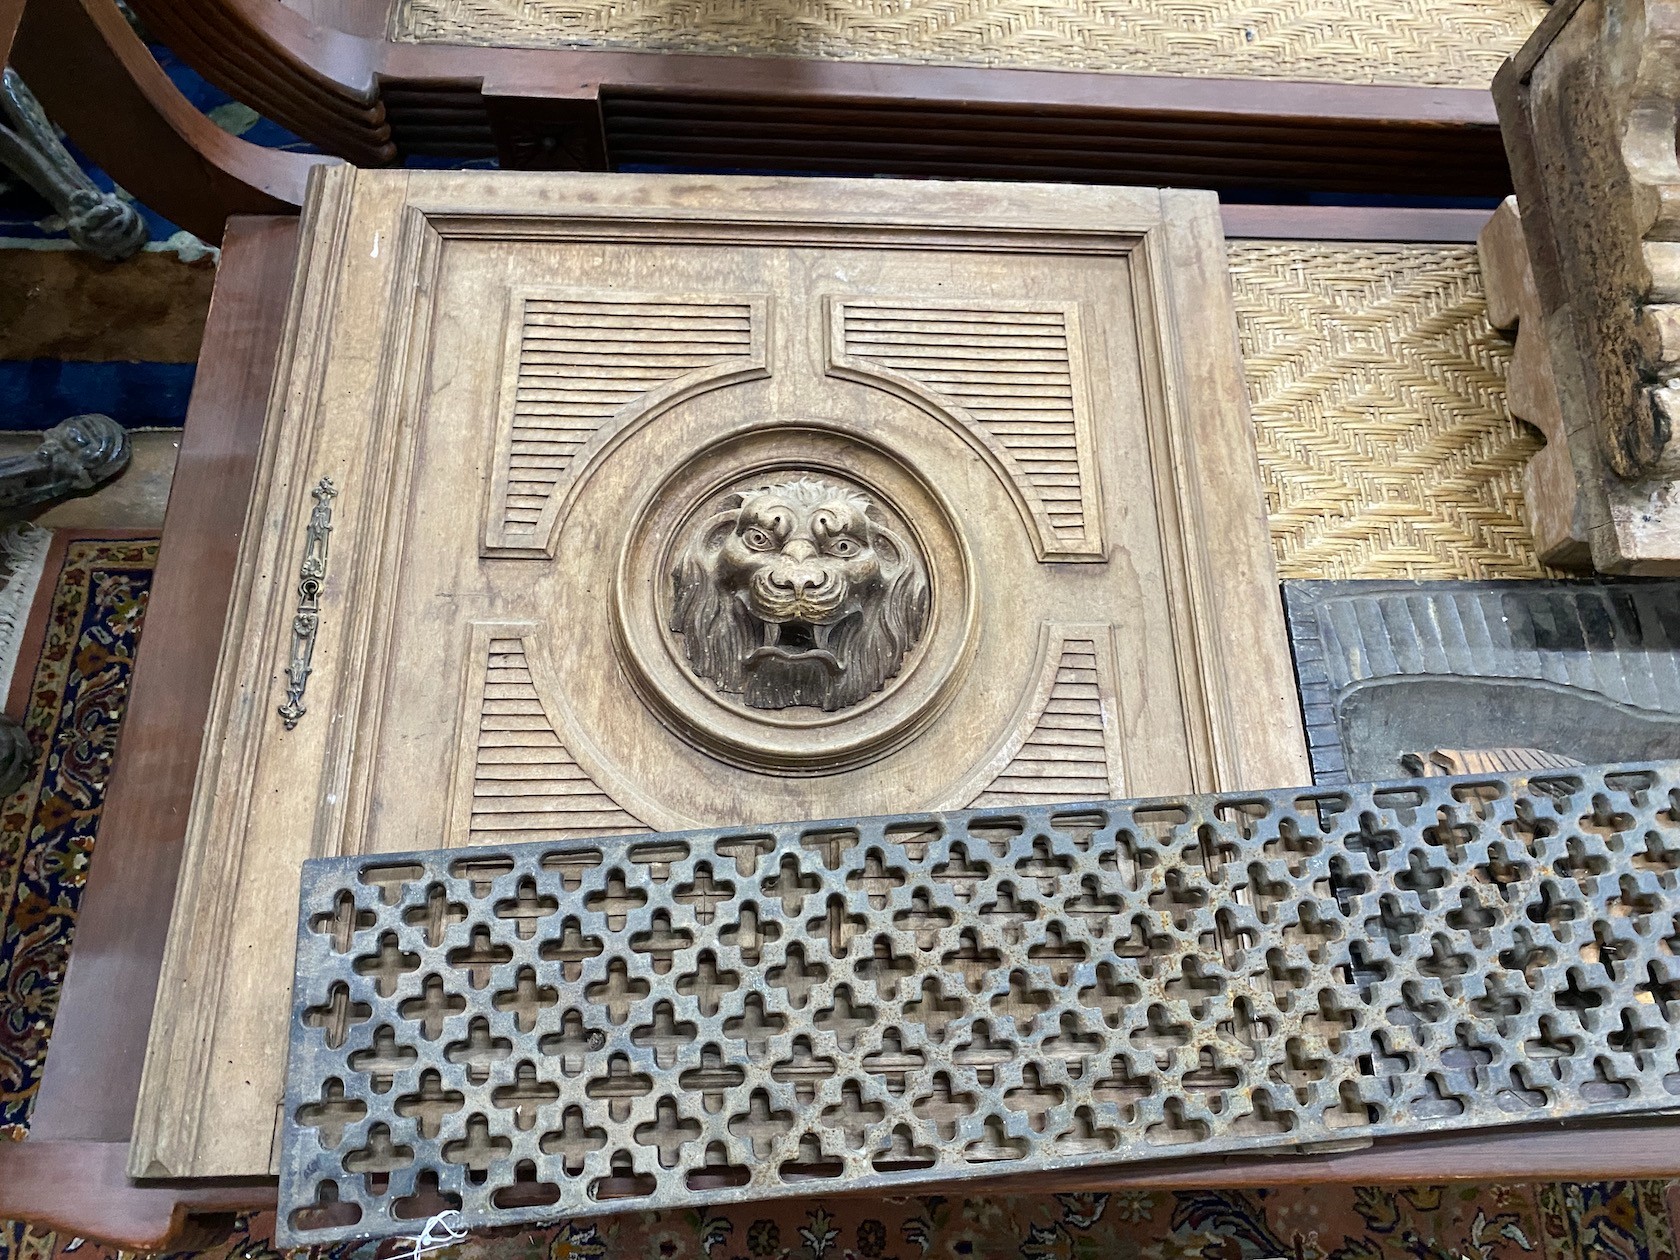 An Asian hardwood low seat, a relief carved panel, a lion's mask carved door and a cast iron grate